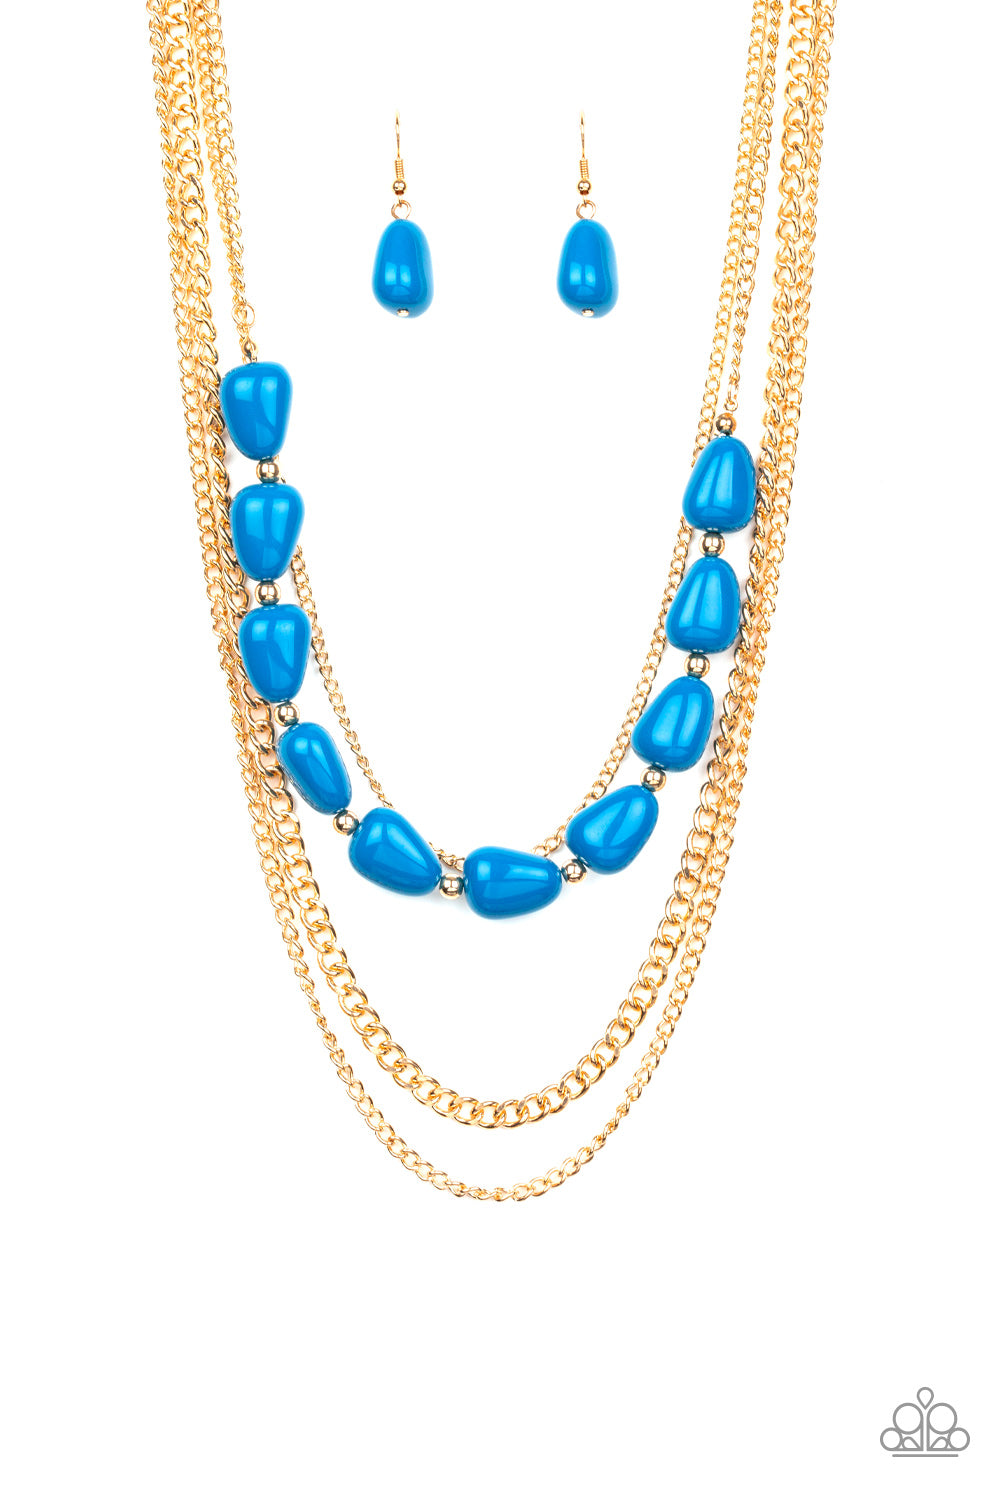 Trend Status - Blue/Gold necklace